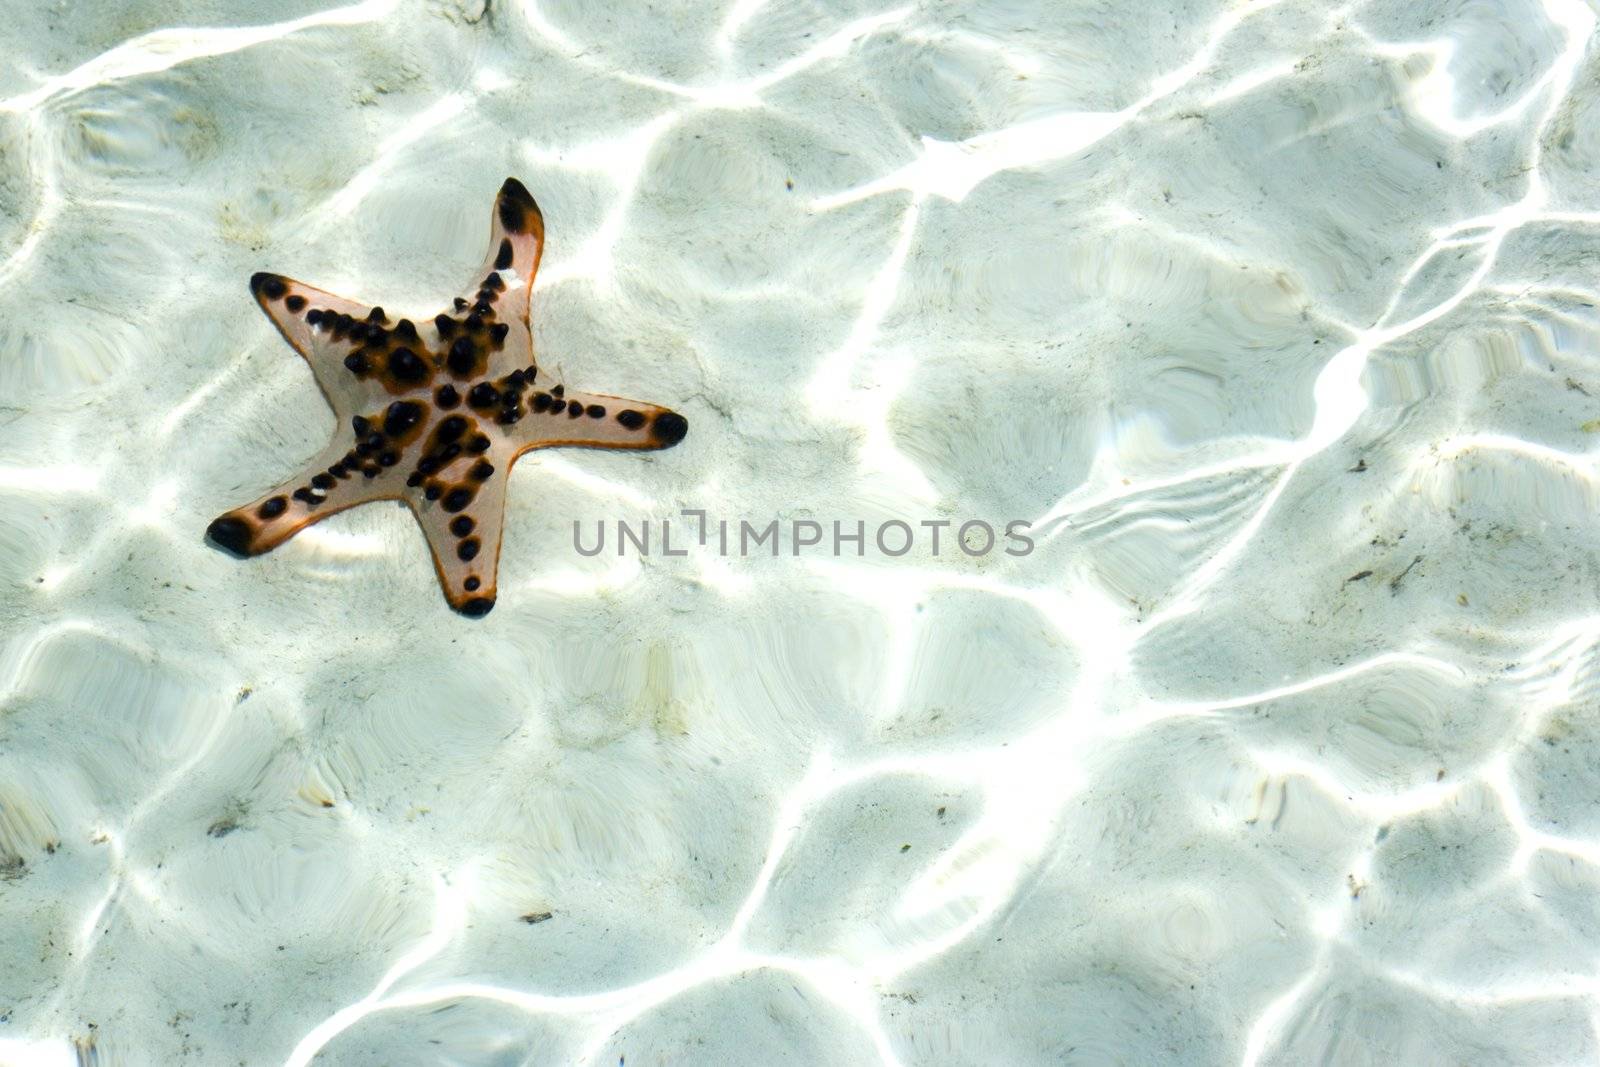 Image of a live starfish underwater.